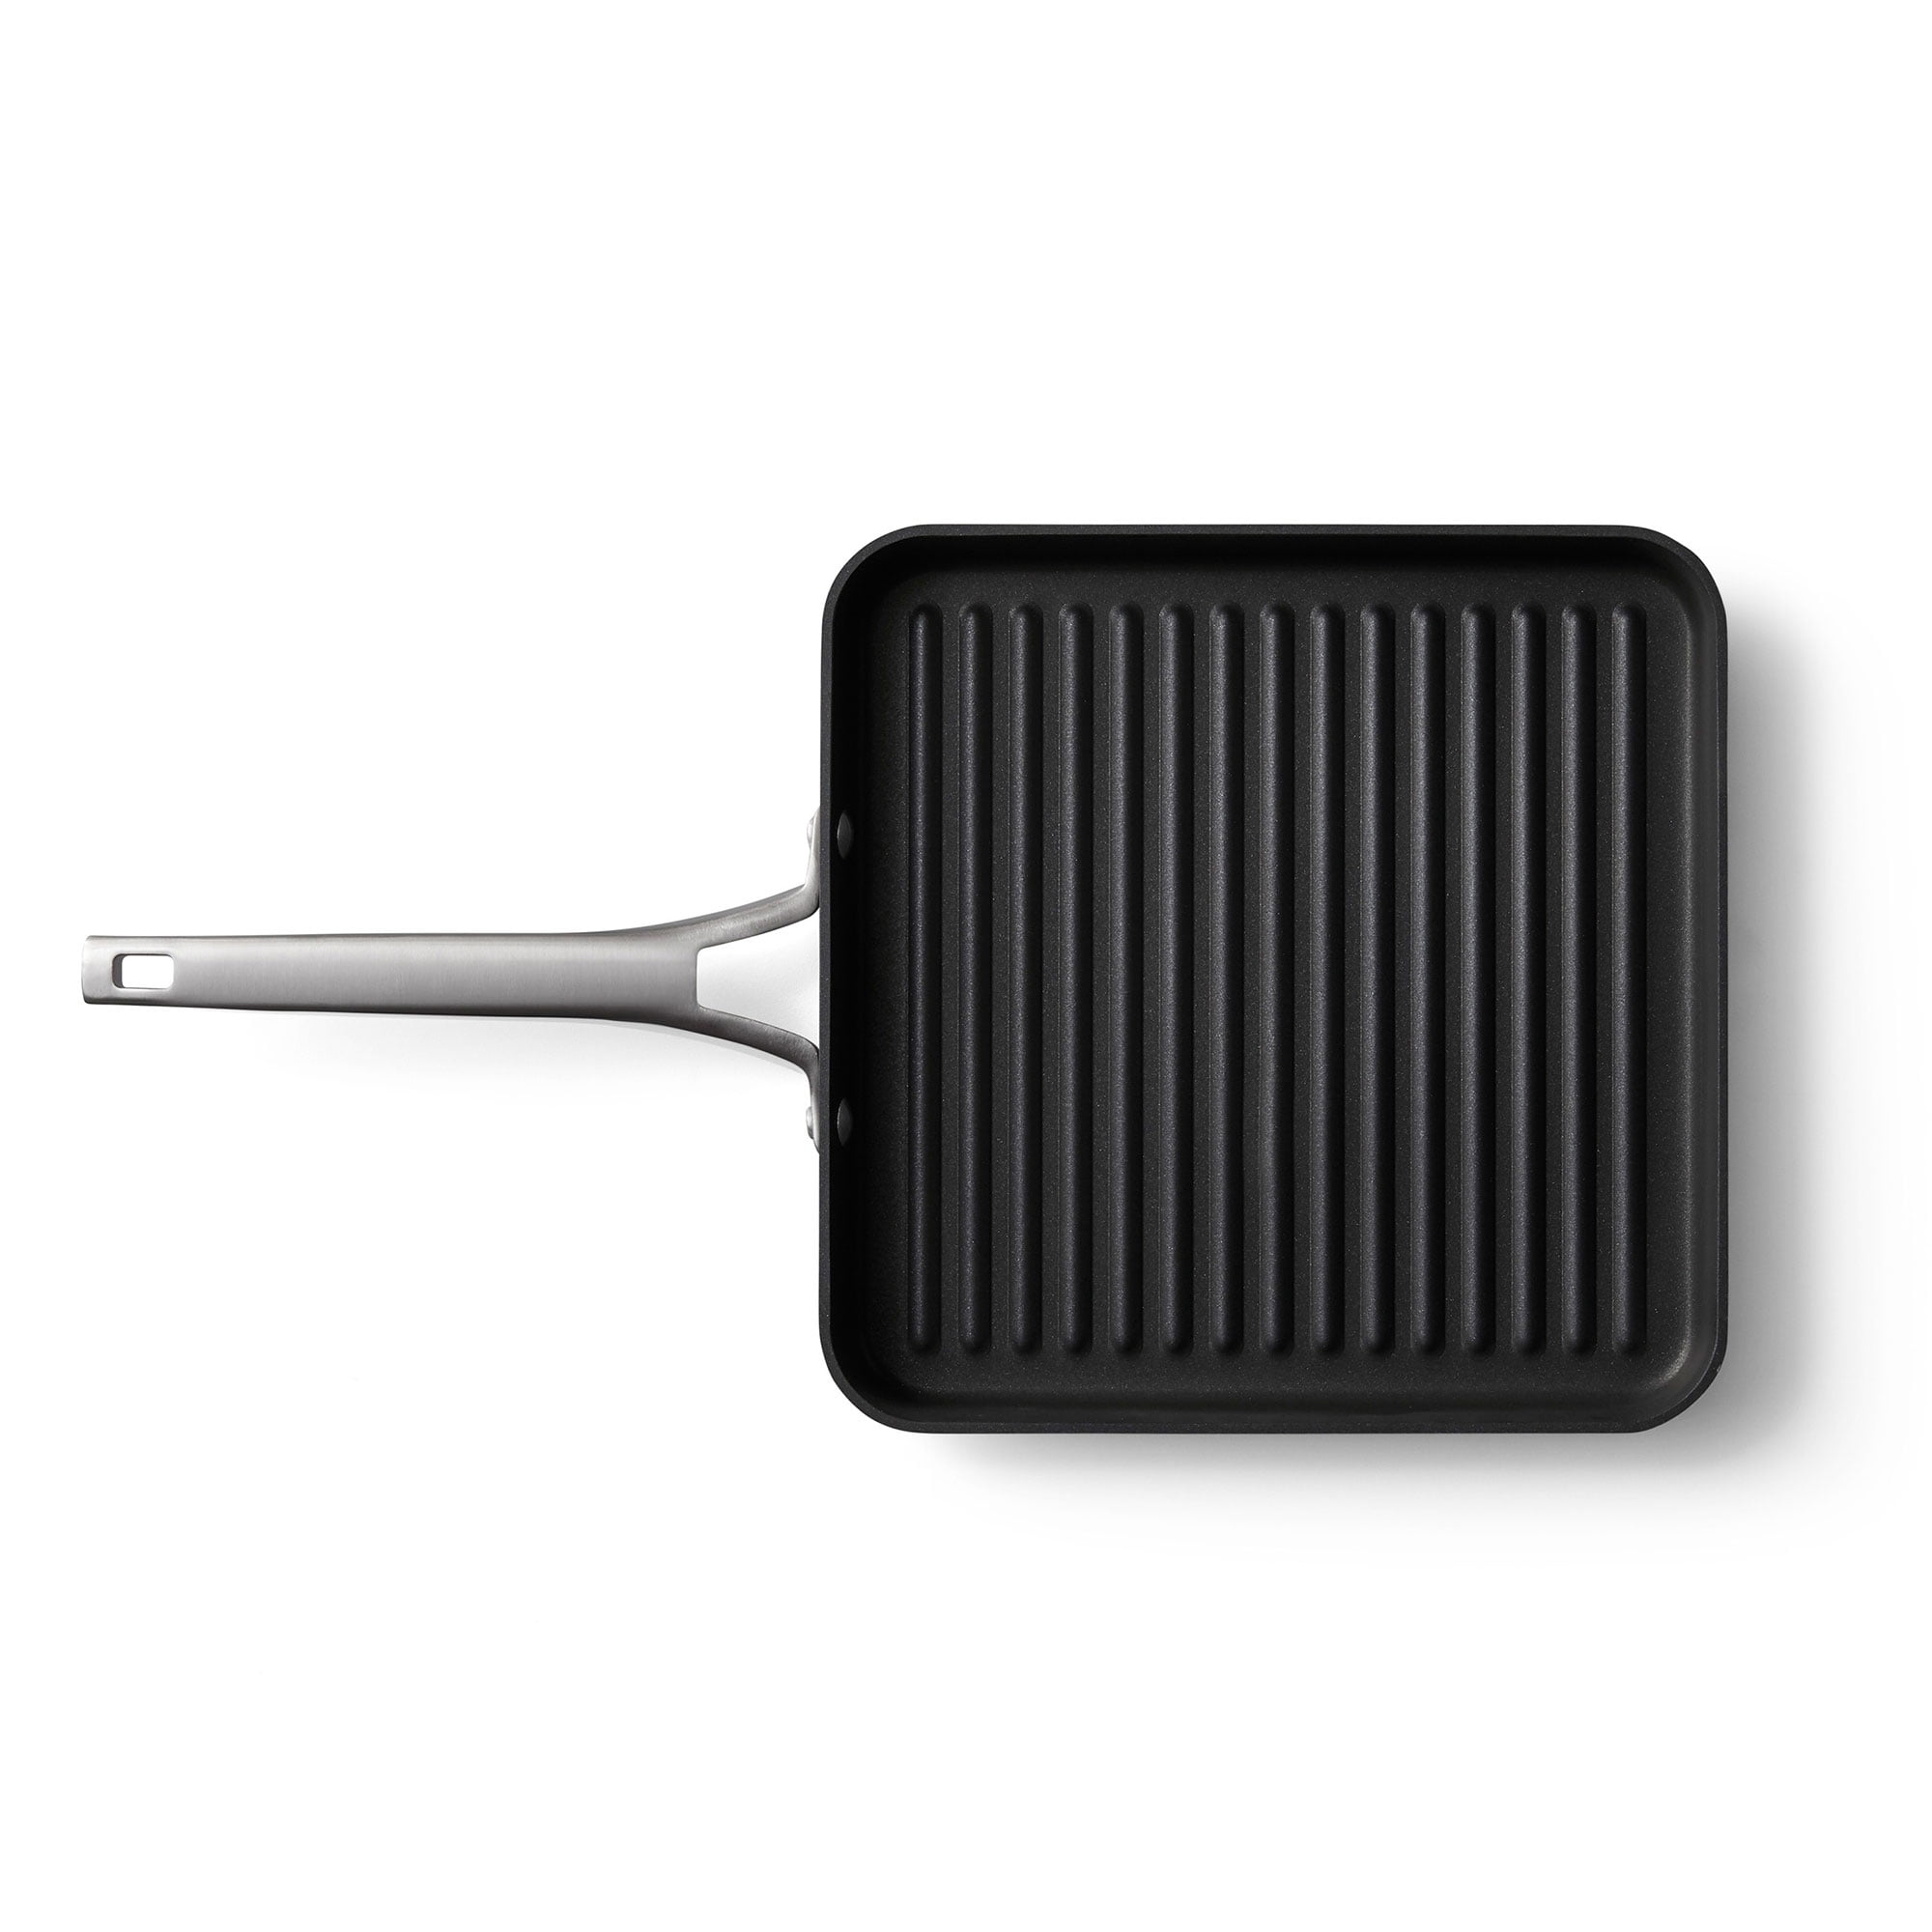 11-Inch Square Grill Pan – Anolon